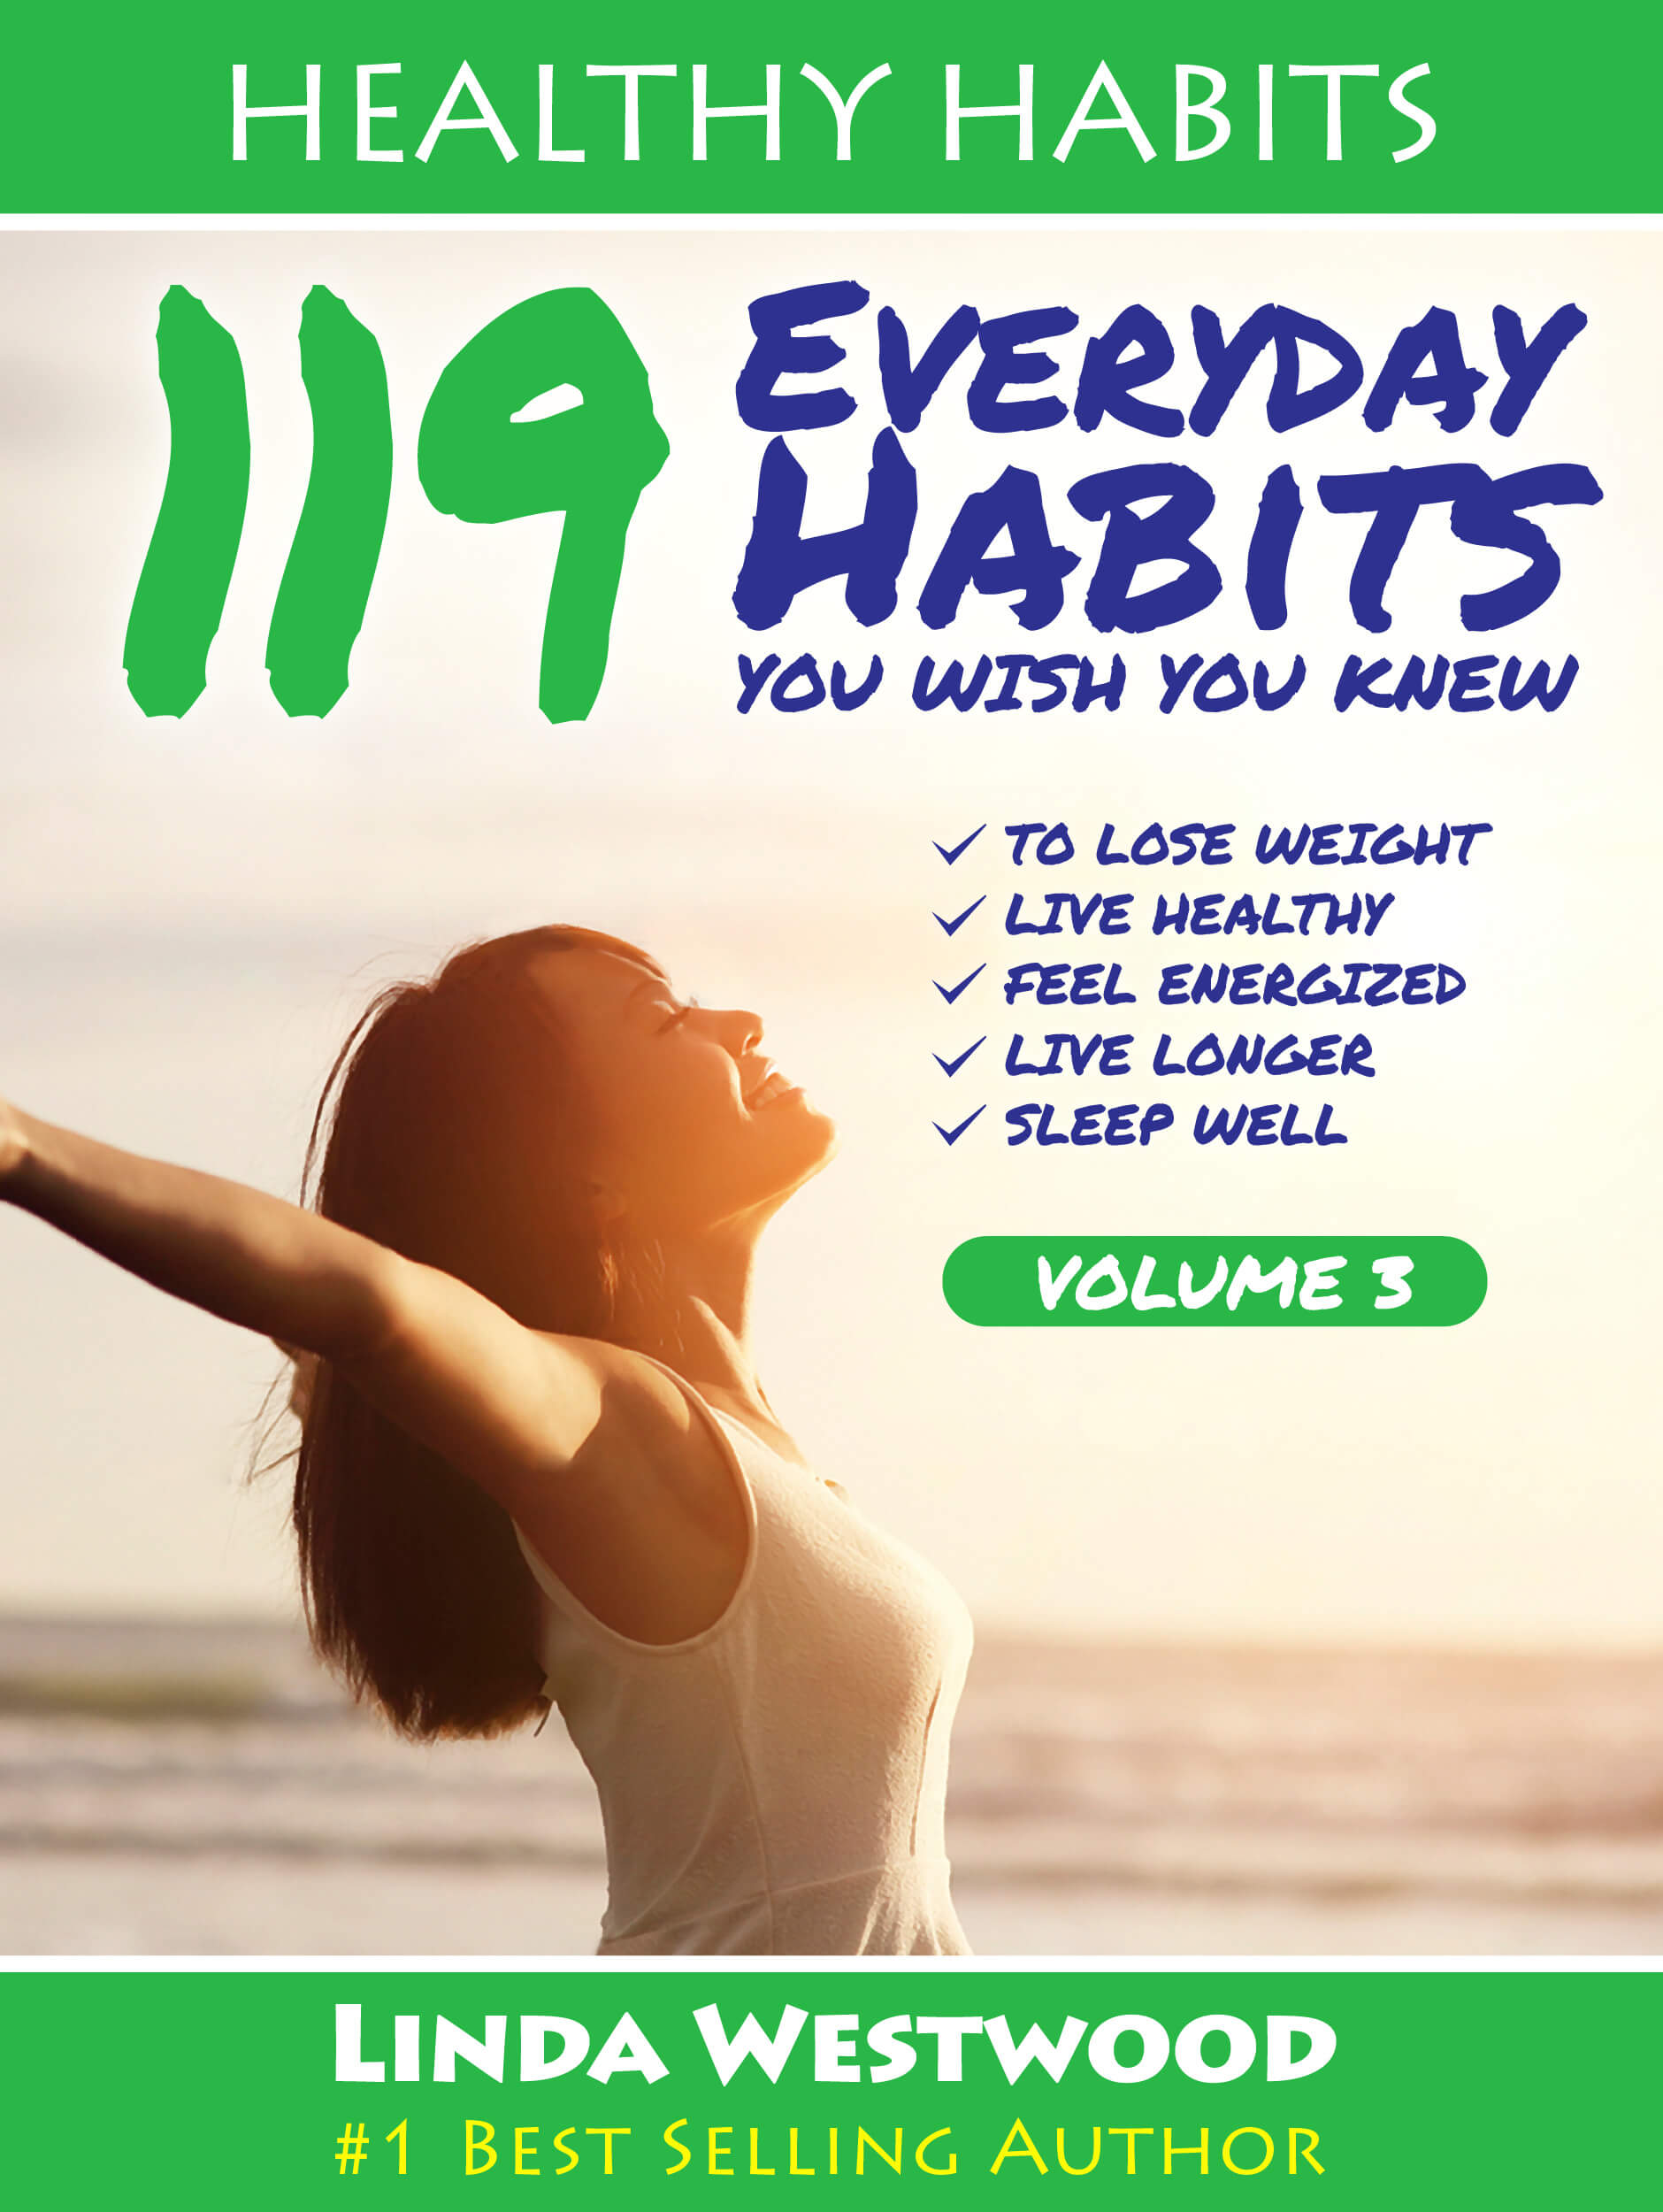 FREE: Healthy Habits Vol 3: 119 Everyday Habits You WISH You KNEW to Lose Weight, Live Healthy, Feel Energized, Live Longer & Sleep Well! by Linda Westwood